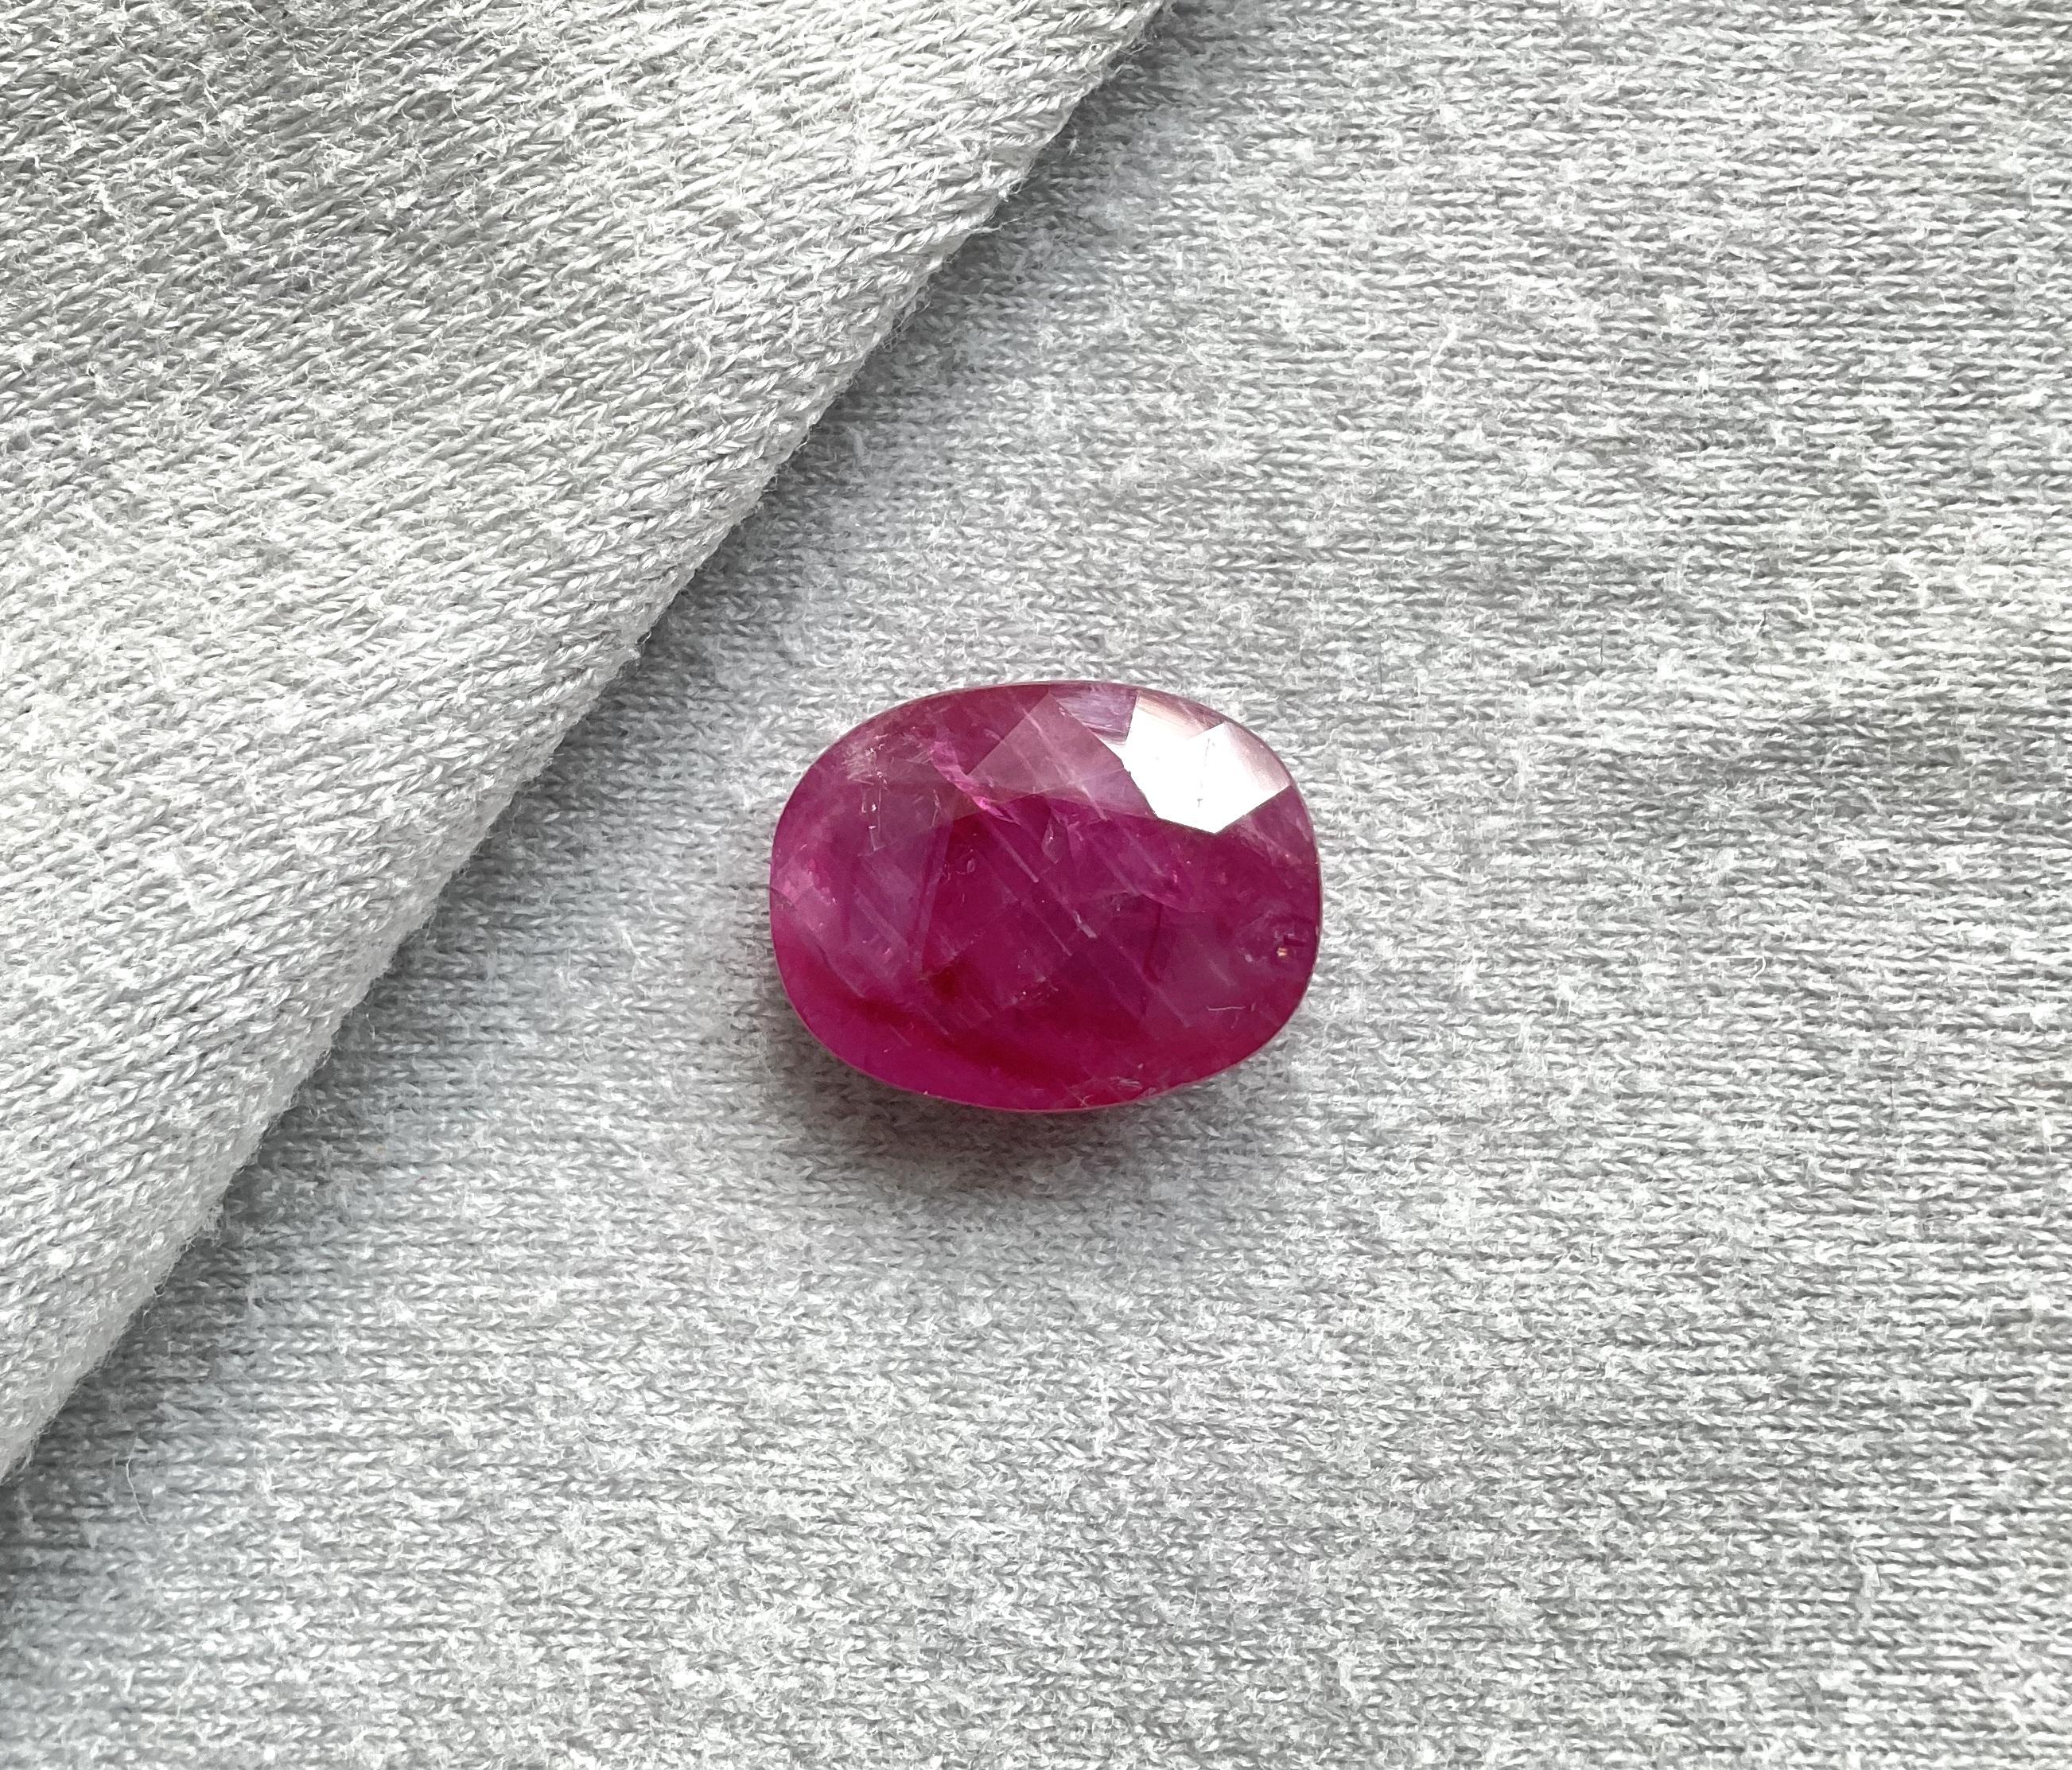 Rare Burmese Myanmar ruby no heat no treatment
Weight: 11.03 Carats
Size: 15.5x12x6 MM
Pieces: 1
Shape: Faceted Oval Cut stone